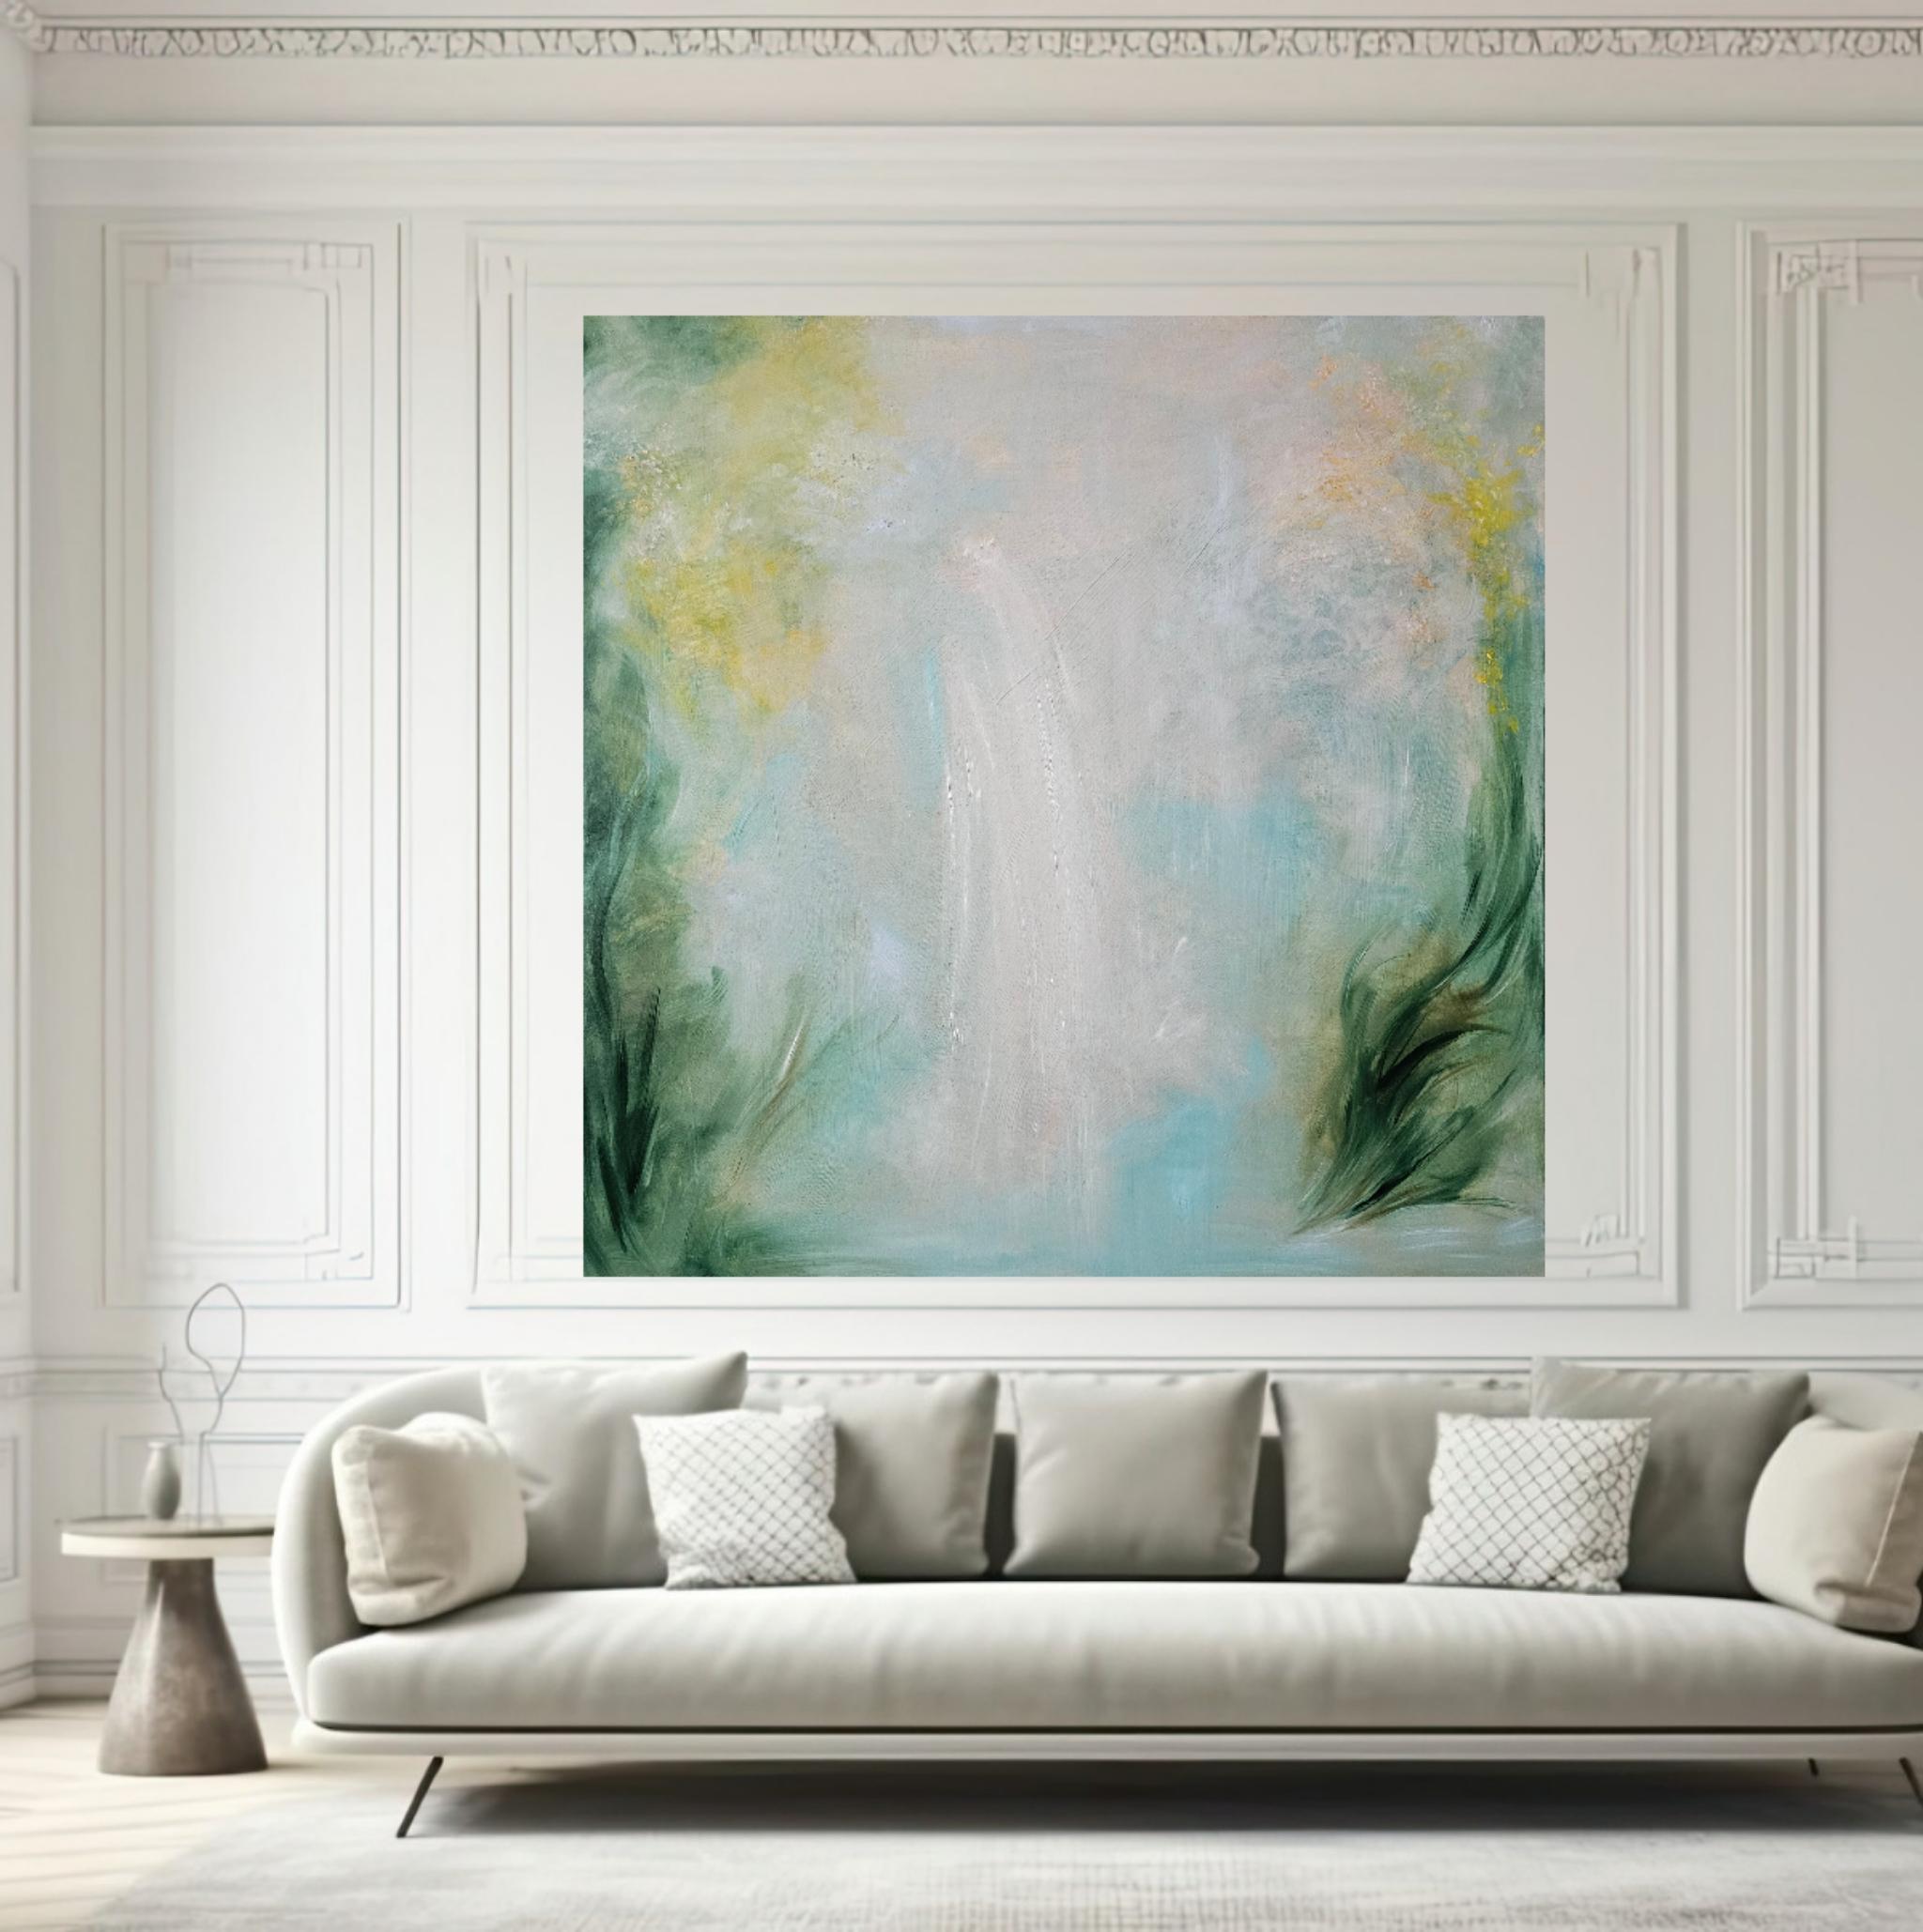 The Dreamer - Ethereal abstract landscape painting For Sale 14